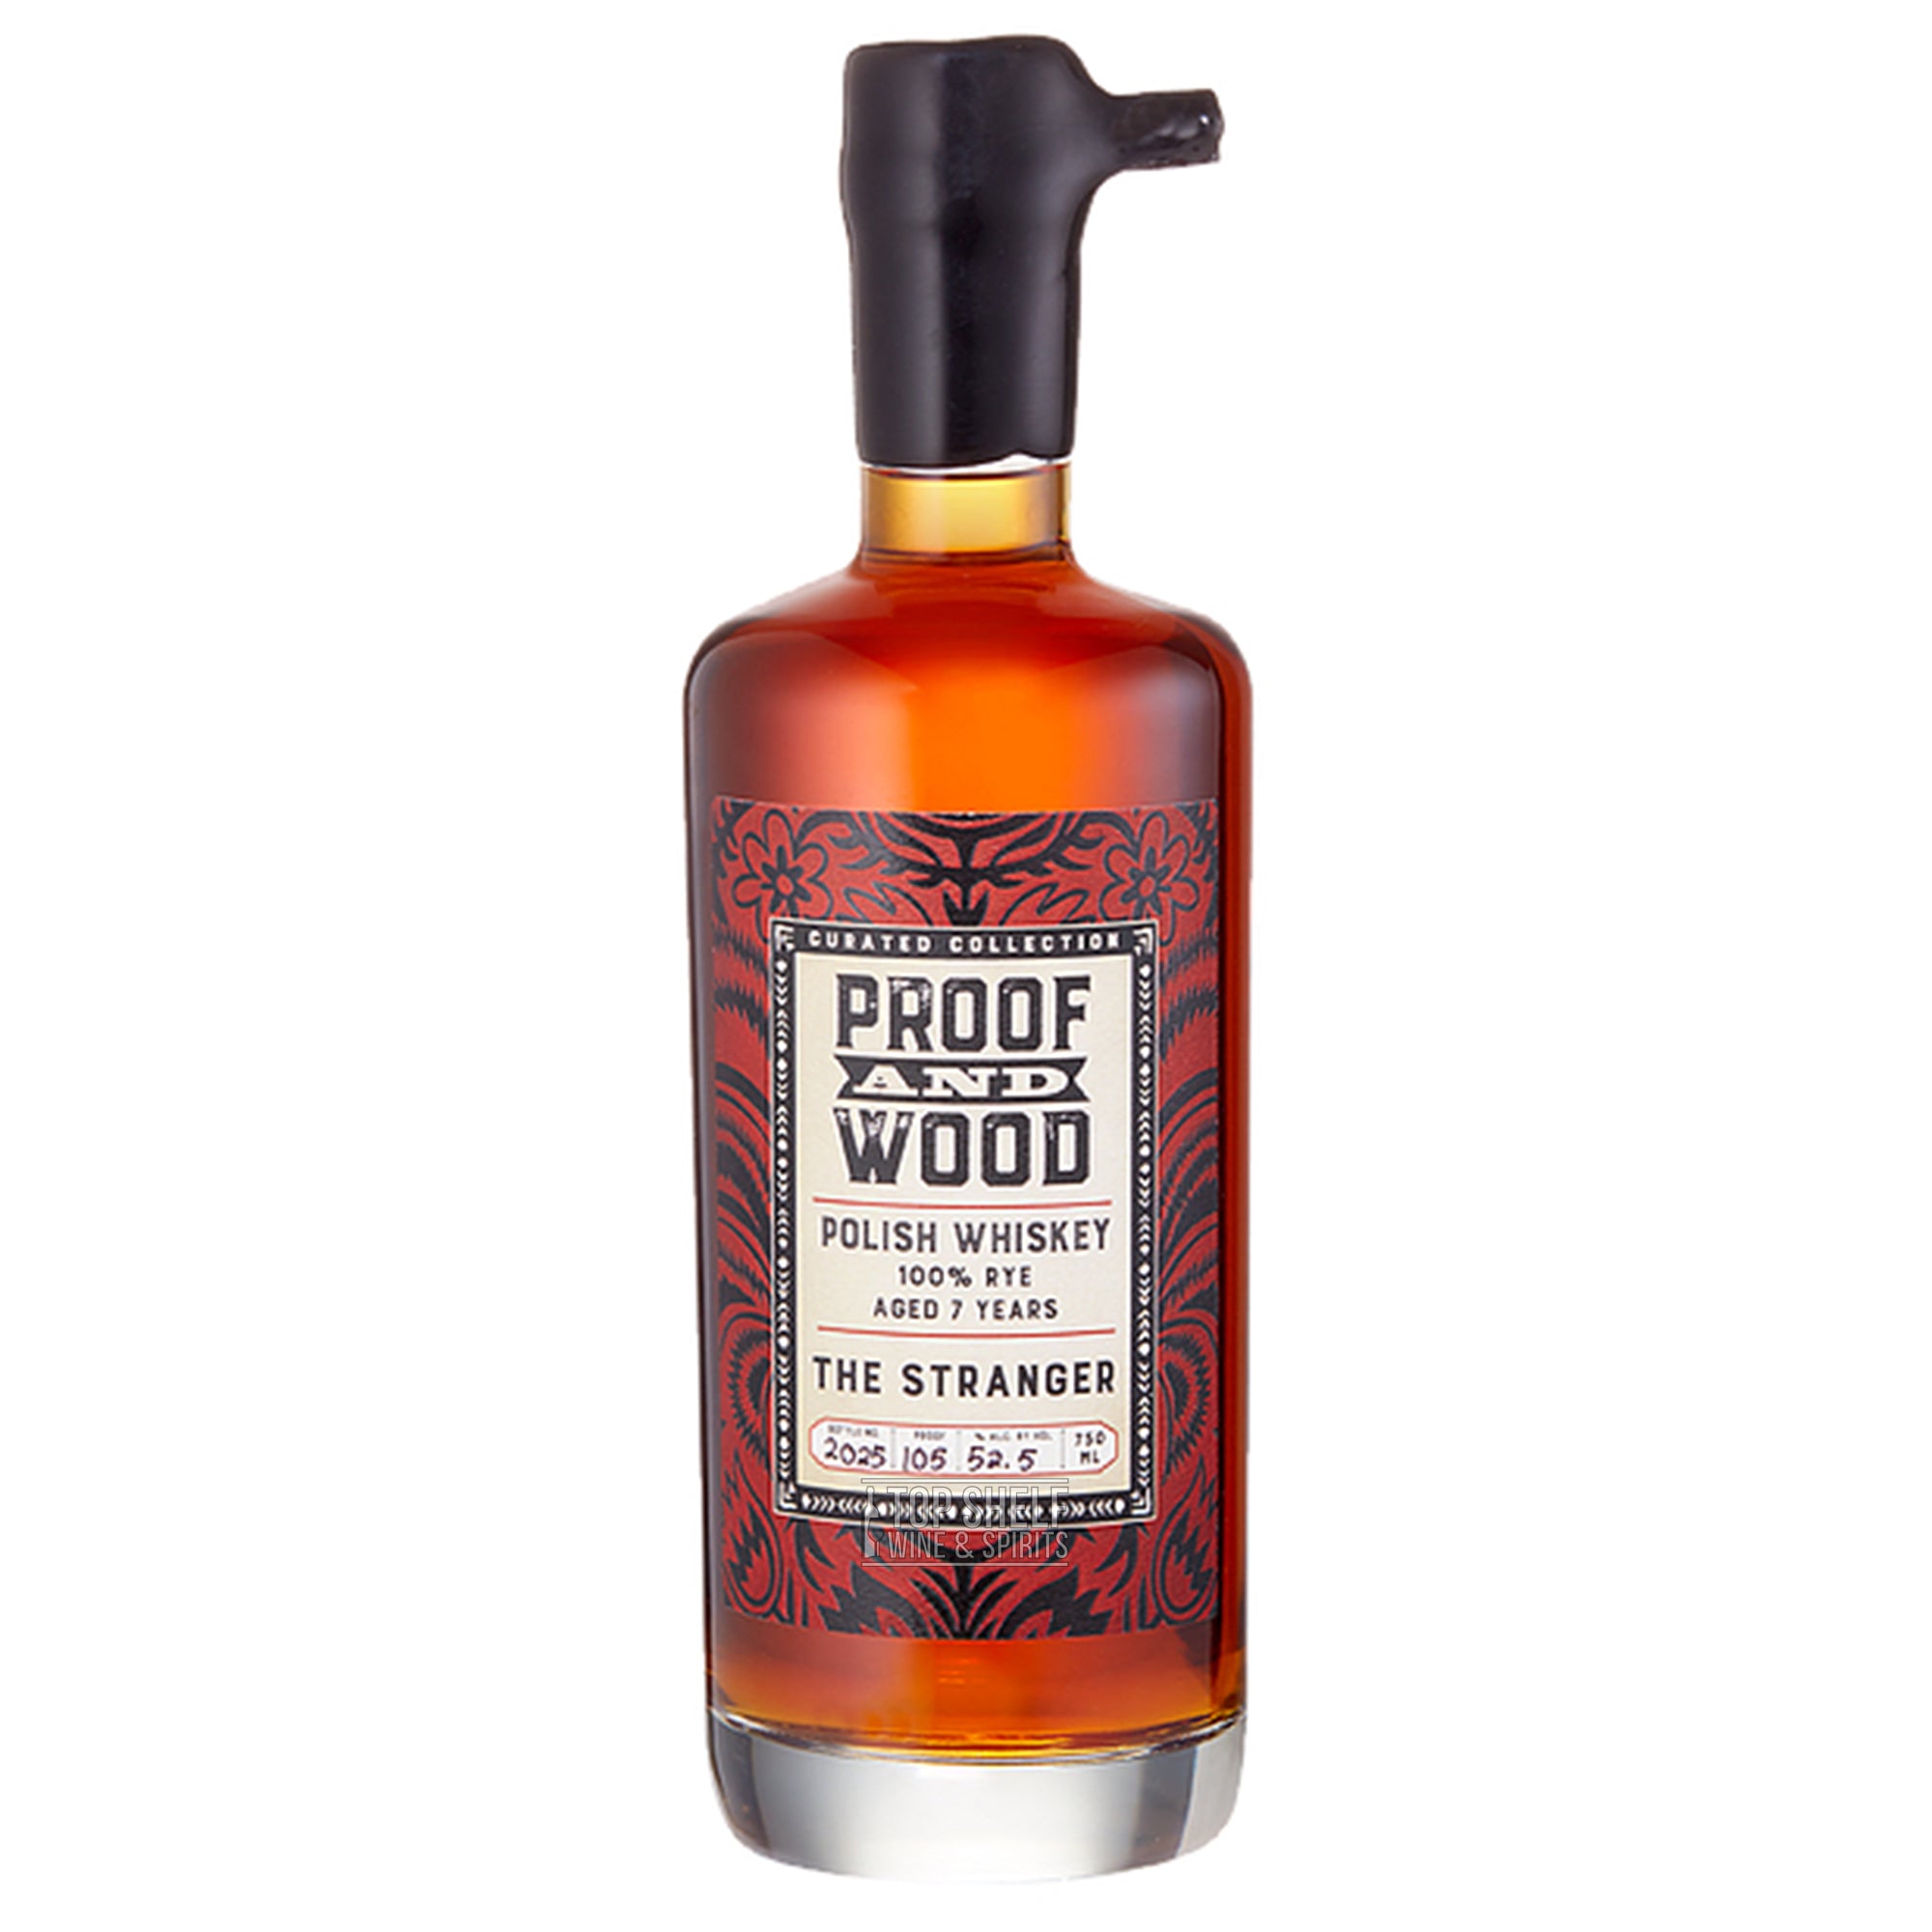 Proof and Wood Curated Collection The Stranger 7 Year Polish Whiskey